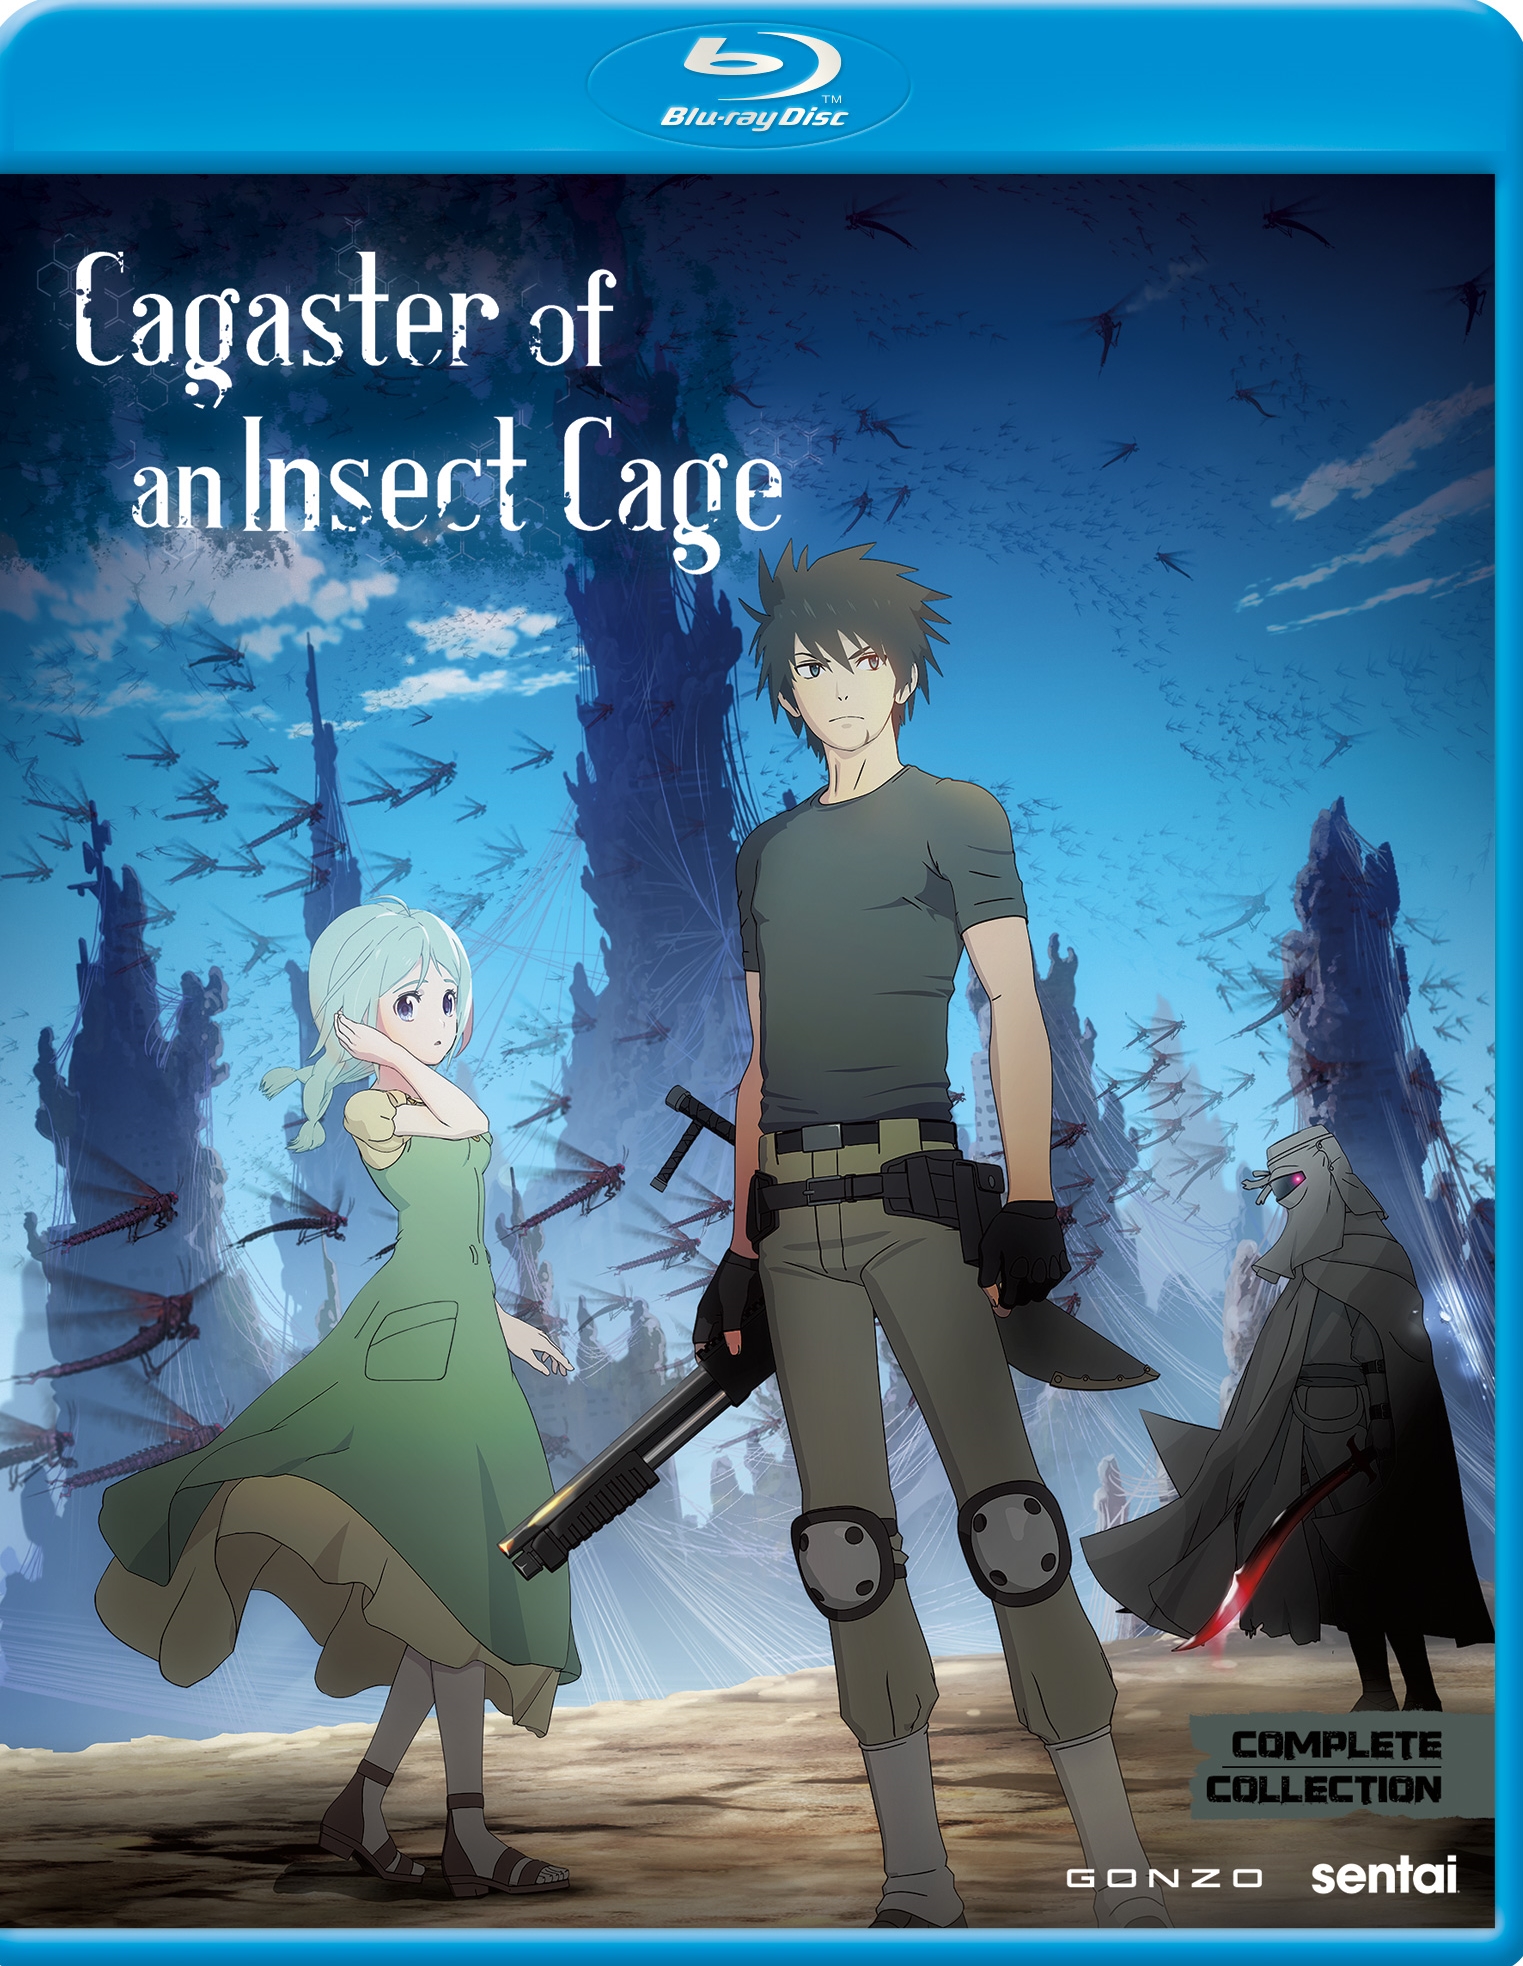 Cagaster of an Insect Cage [Blu-ray] [2 Discs]